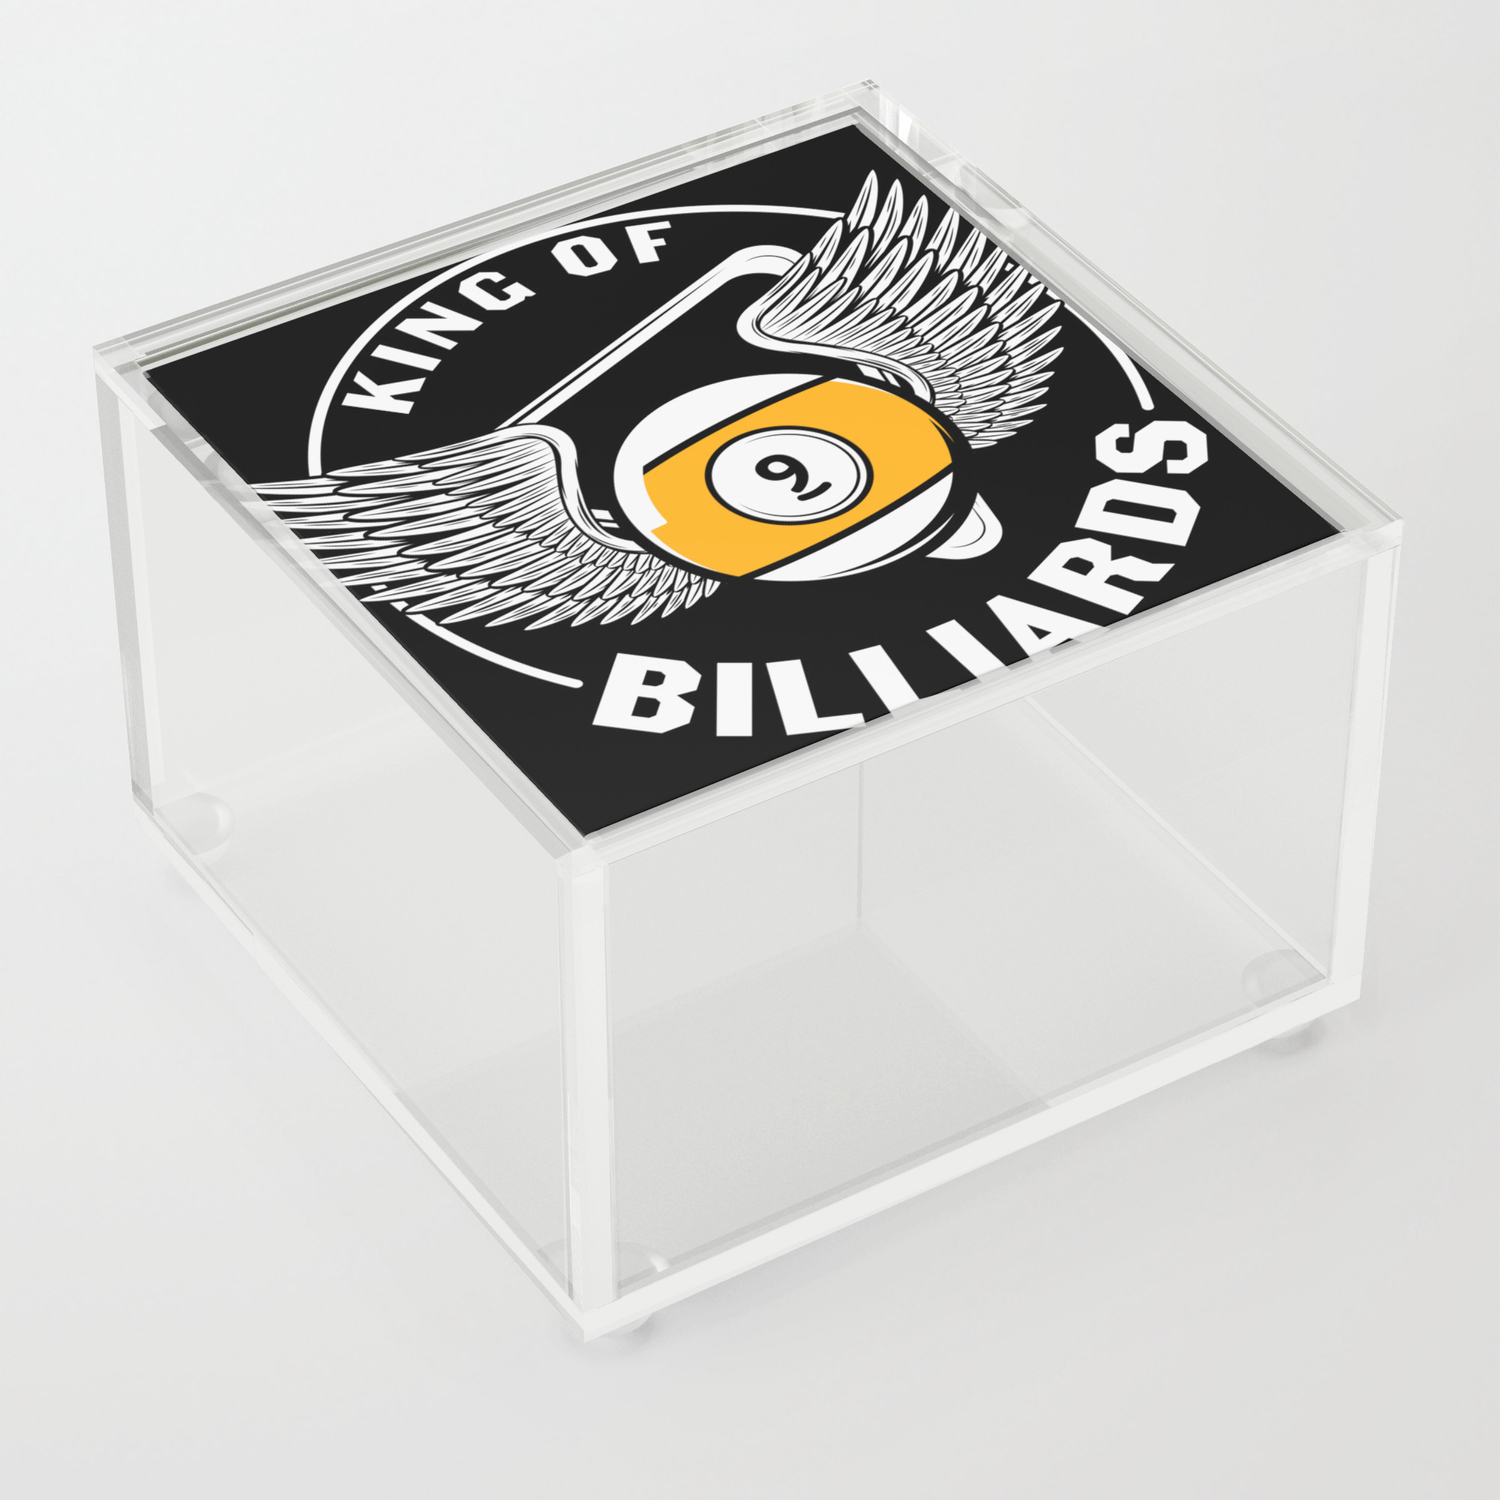 King of Billiards Quotes Funny Acrylic Box by art-with-a | Society6